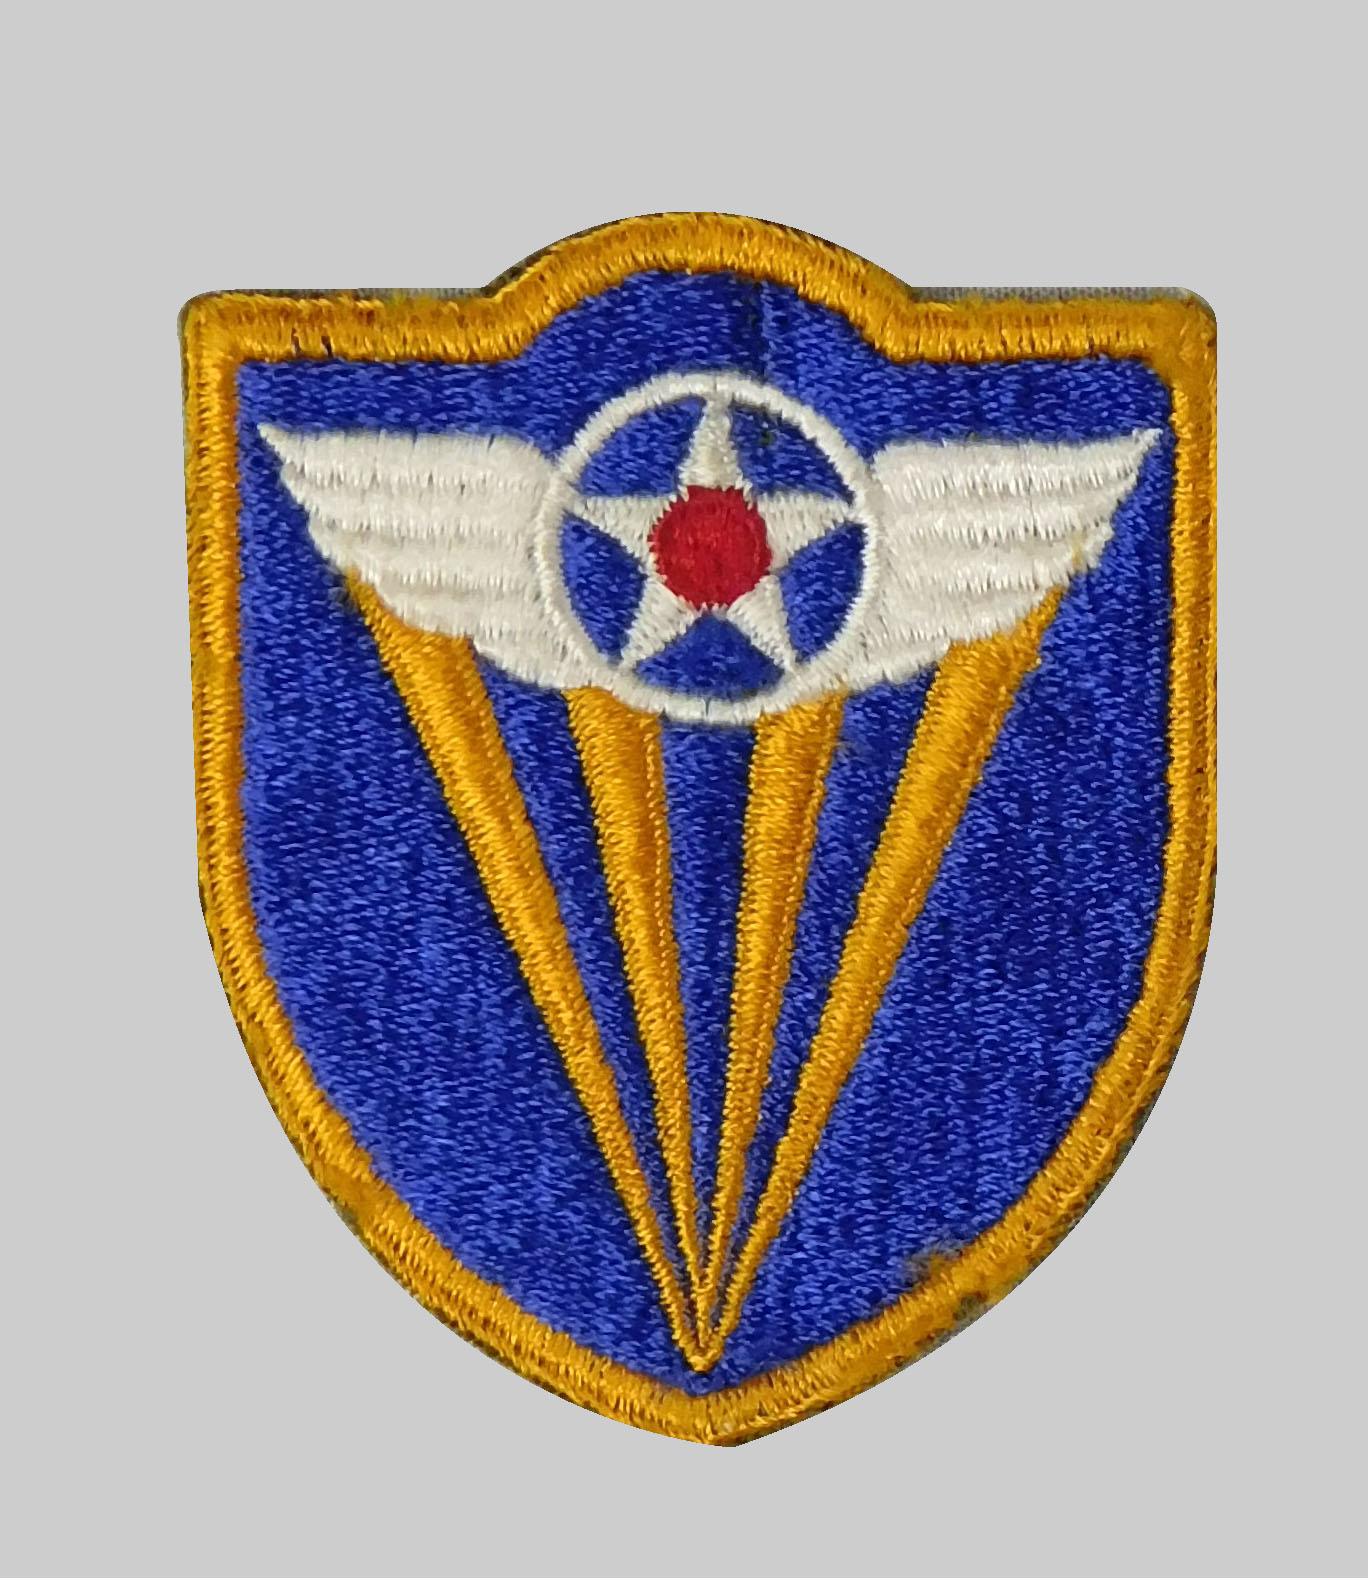 Photograph of US Army 4th Air Force Patch